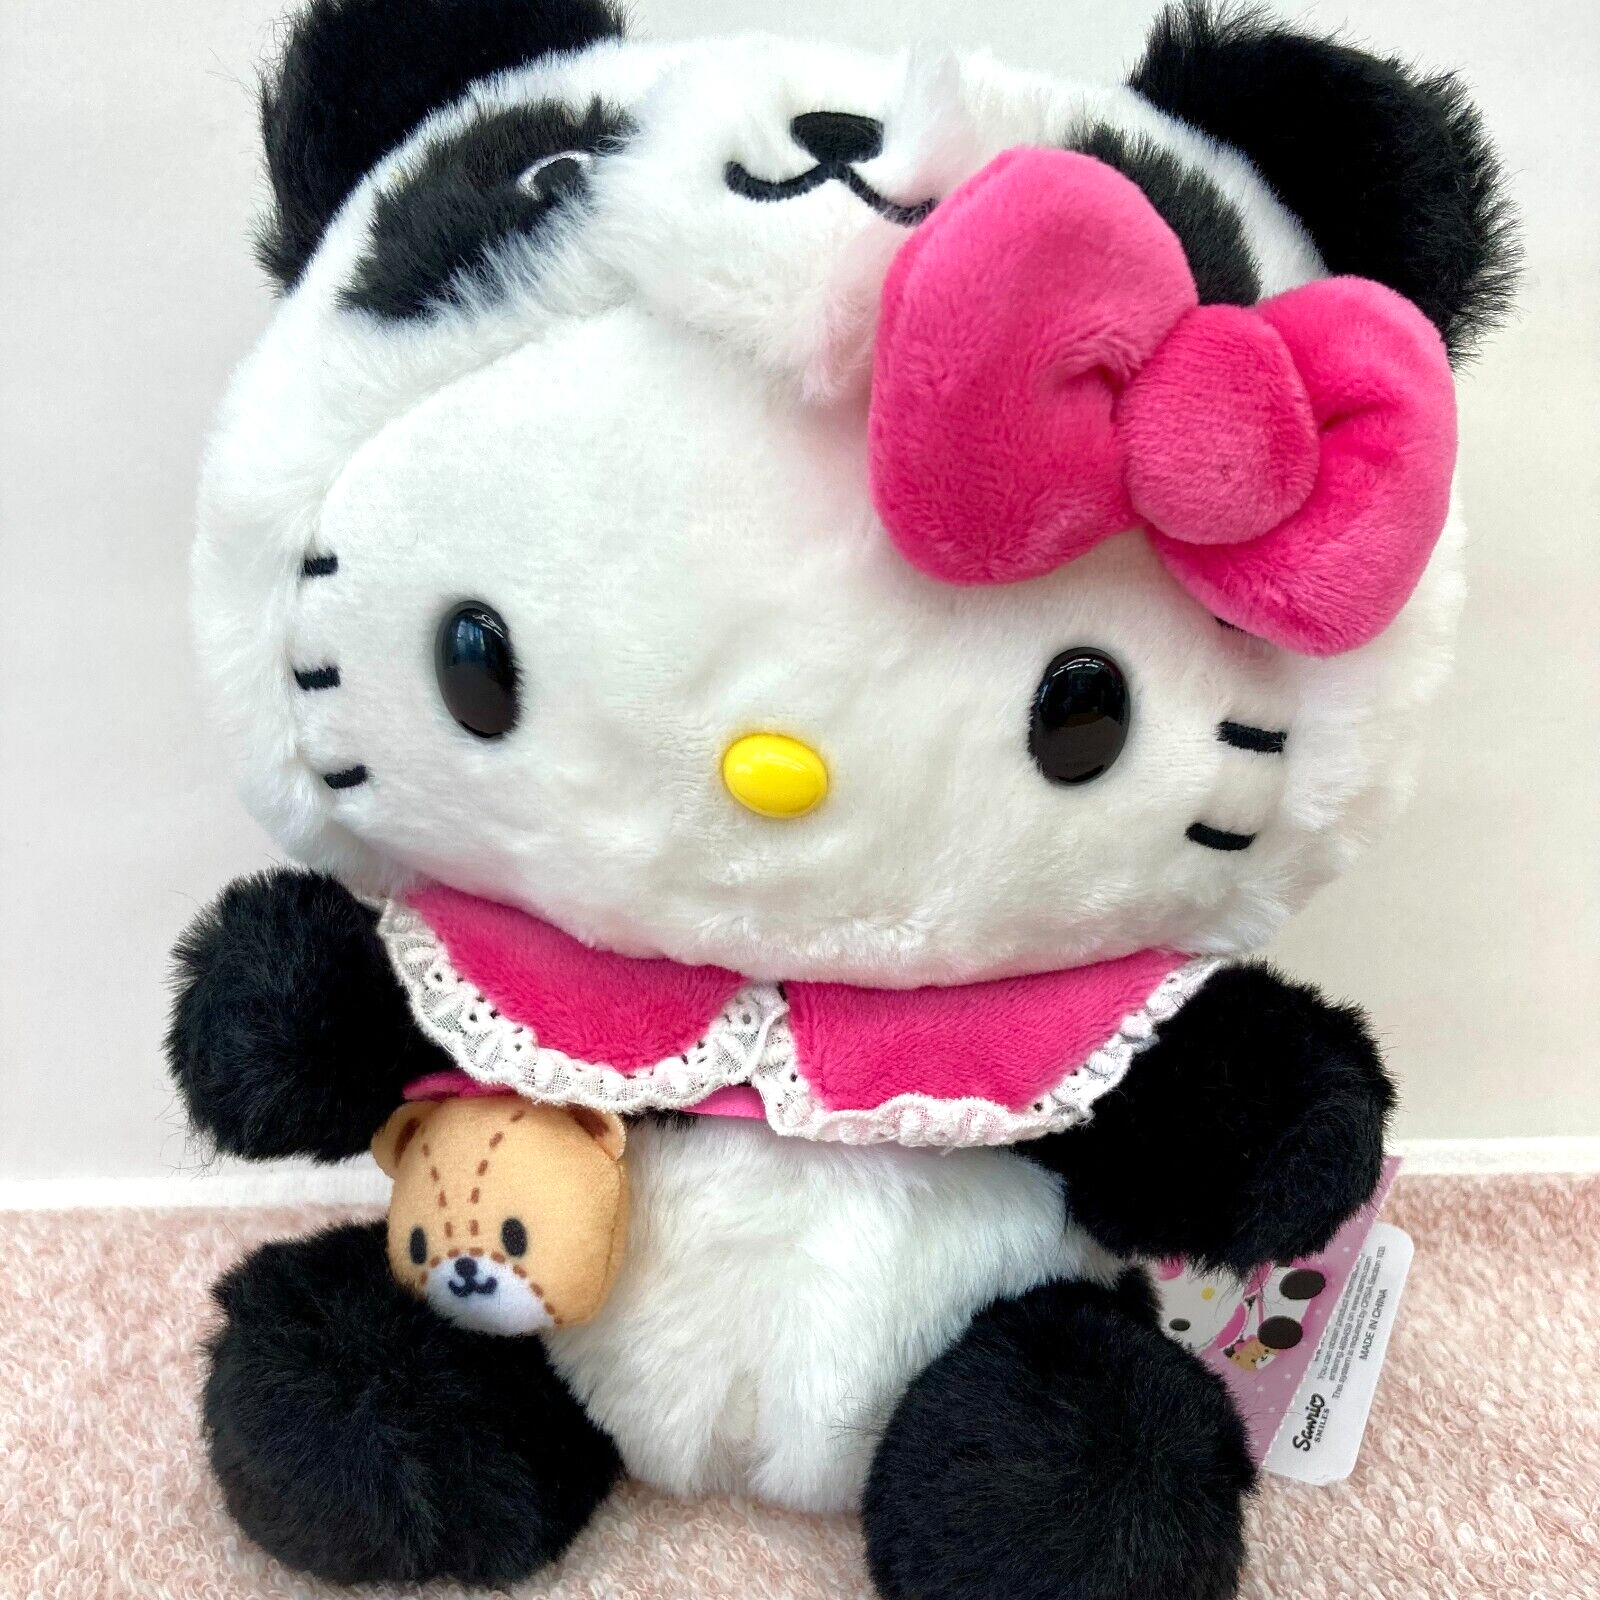 Sanrio Panda Hello Kitty Limited Only in Ueno Zoo Tokyo Plush Doll 7.9 inch New